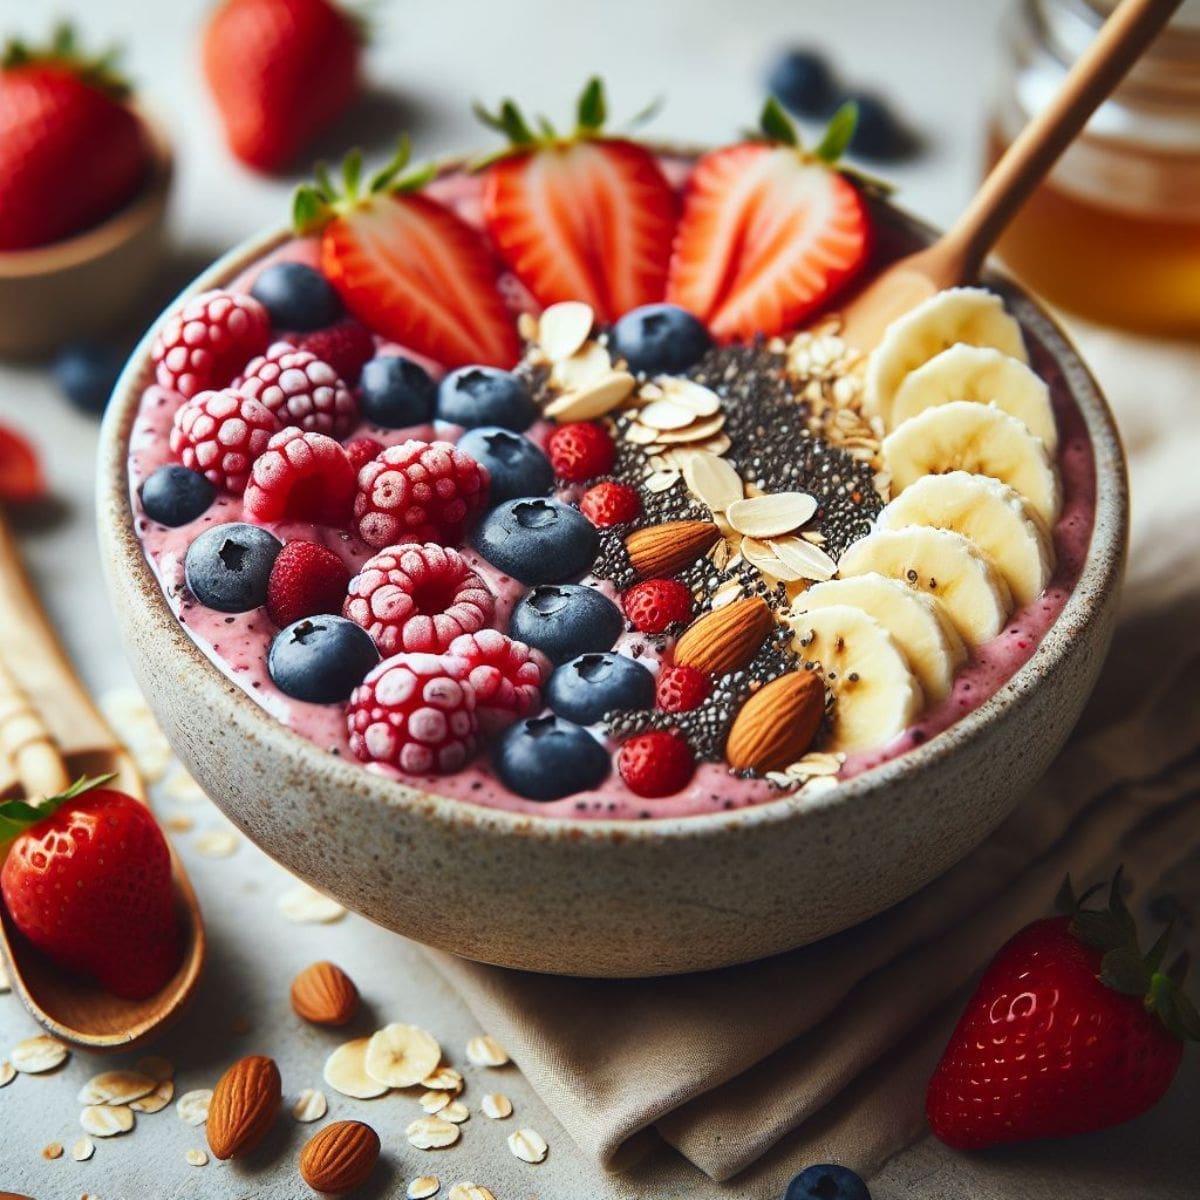 Simple & Delicious: Vegan Berry and Banana Smoothie Bowl Recipe